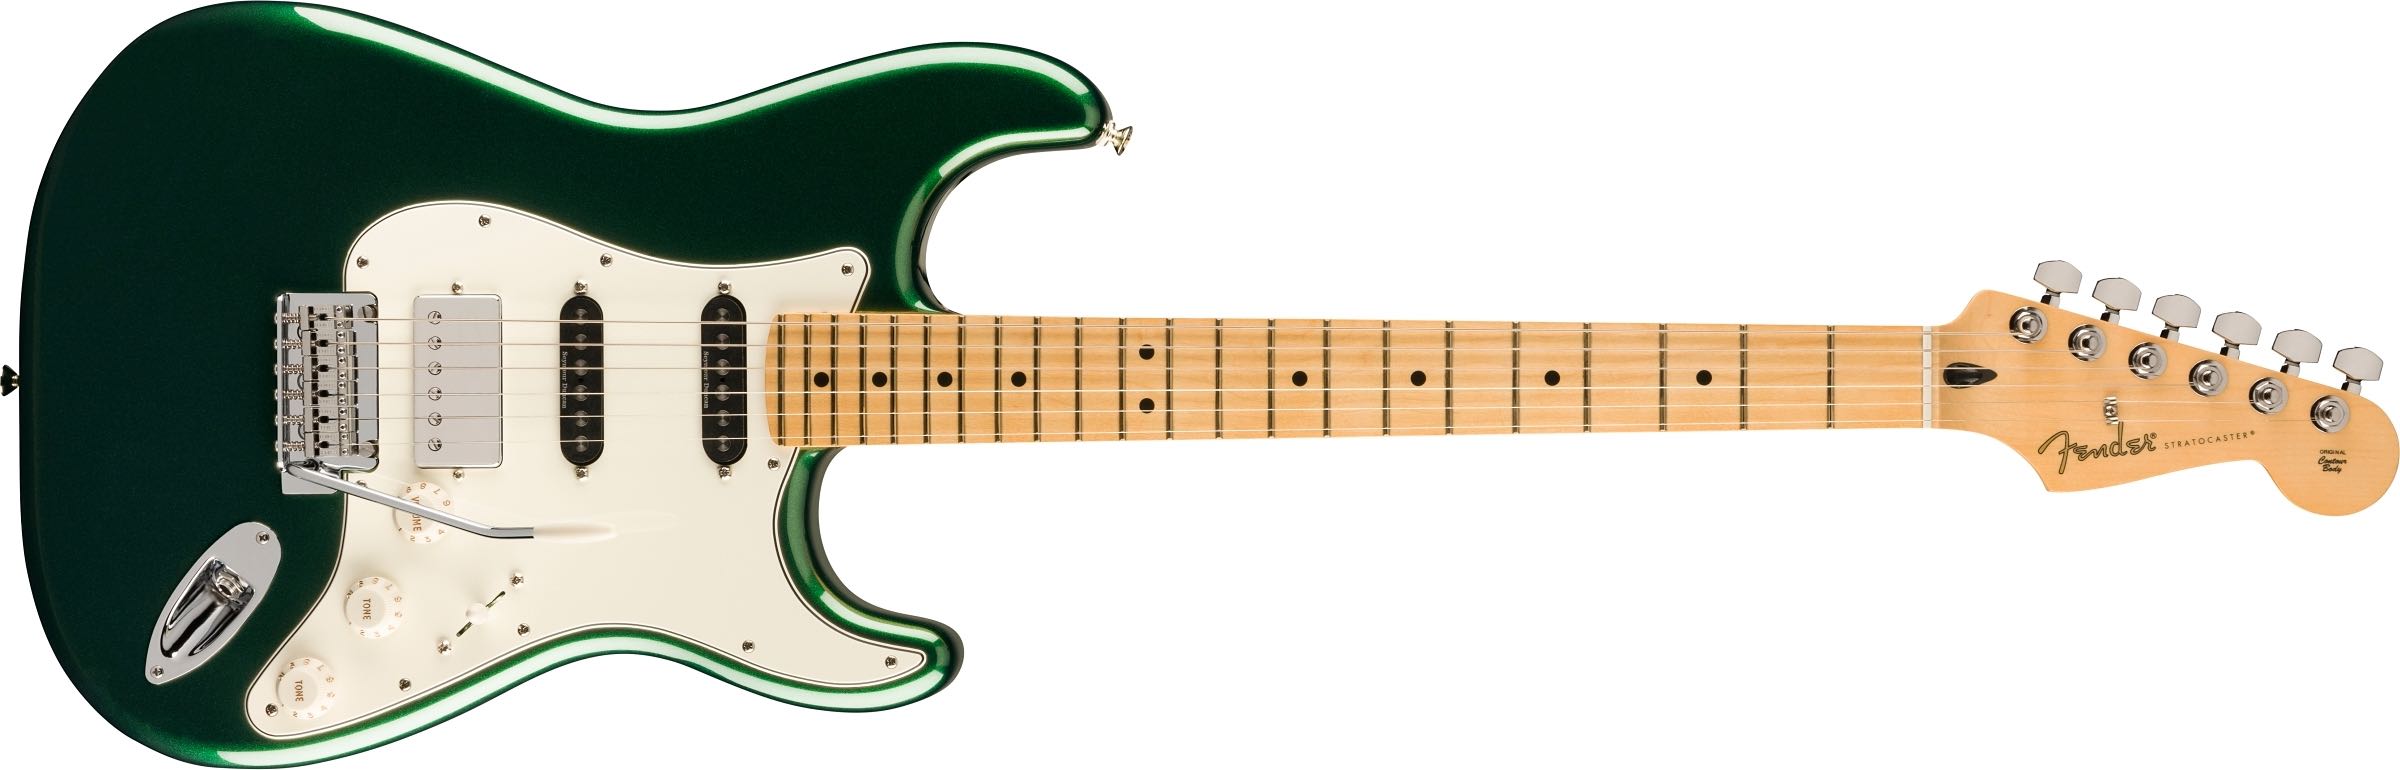 Fender British Racing Green Limited Edition Player Series Stratocaster